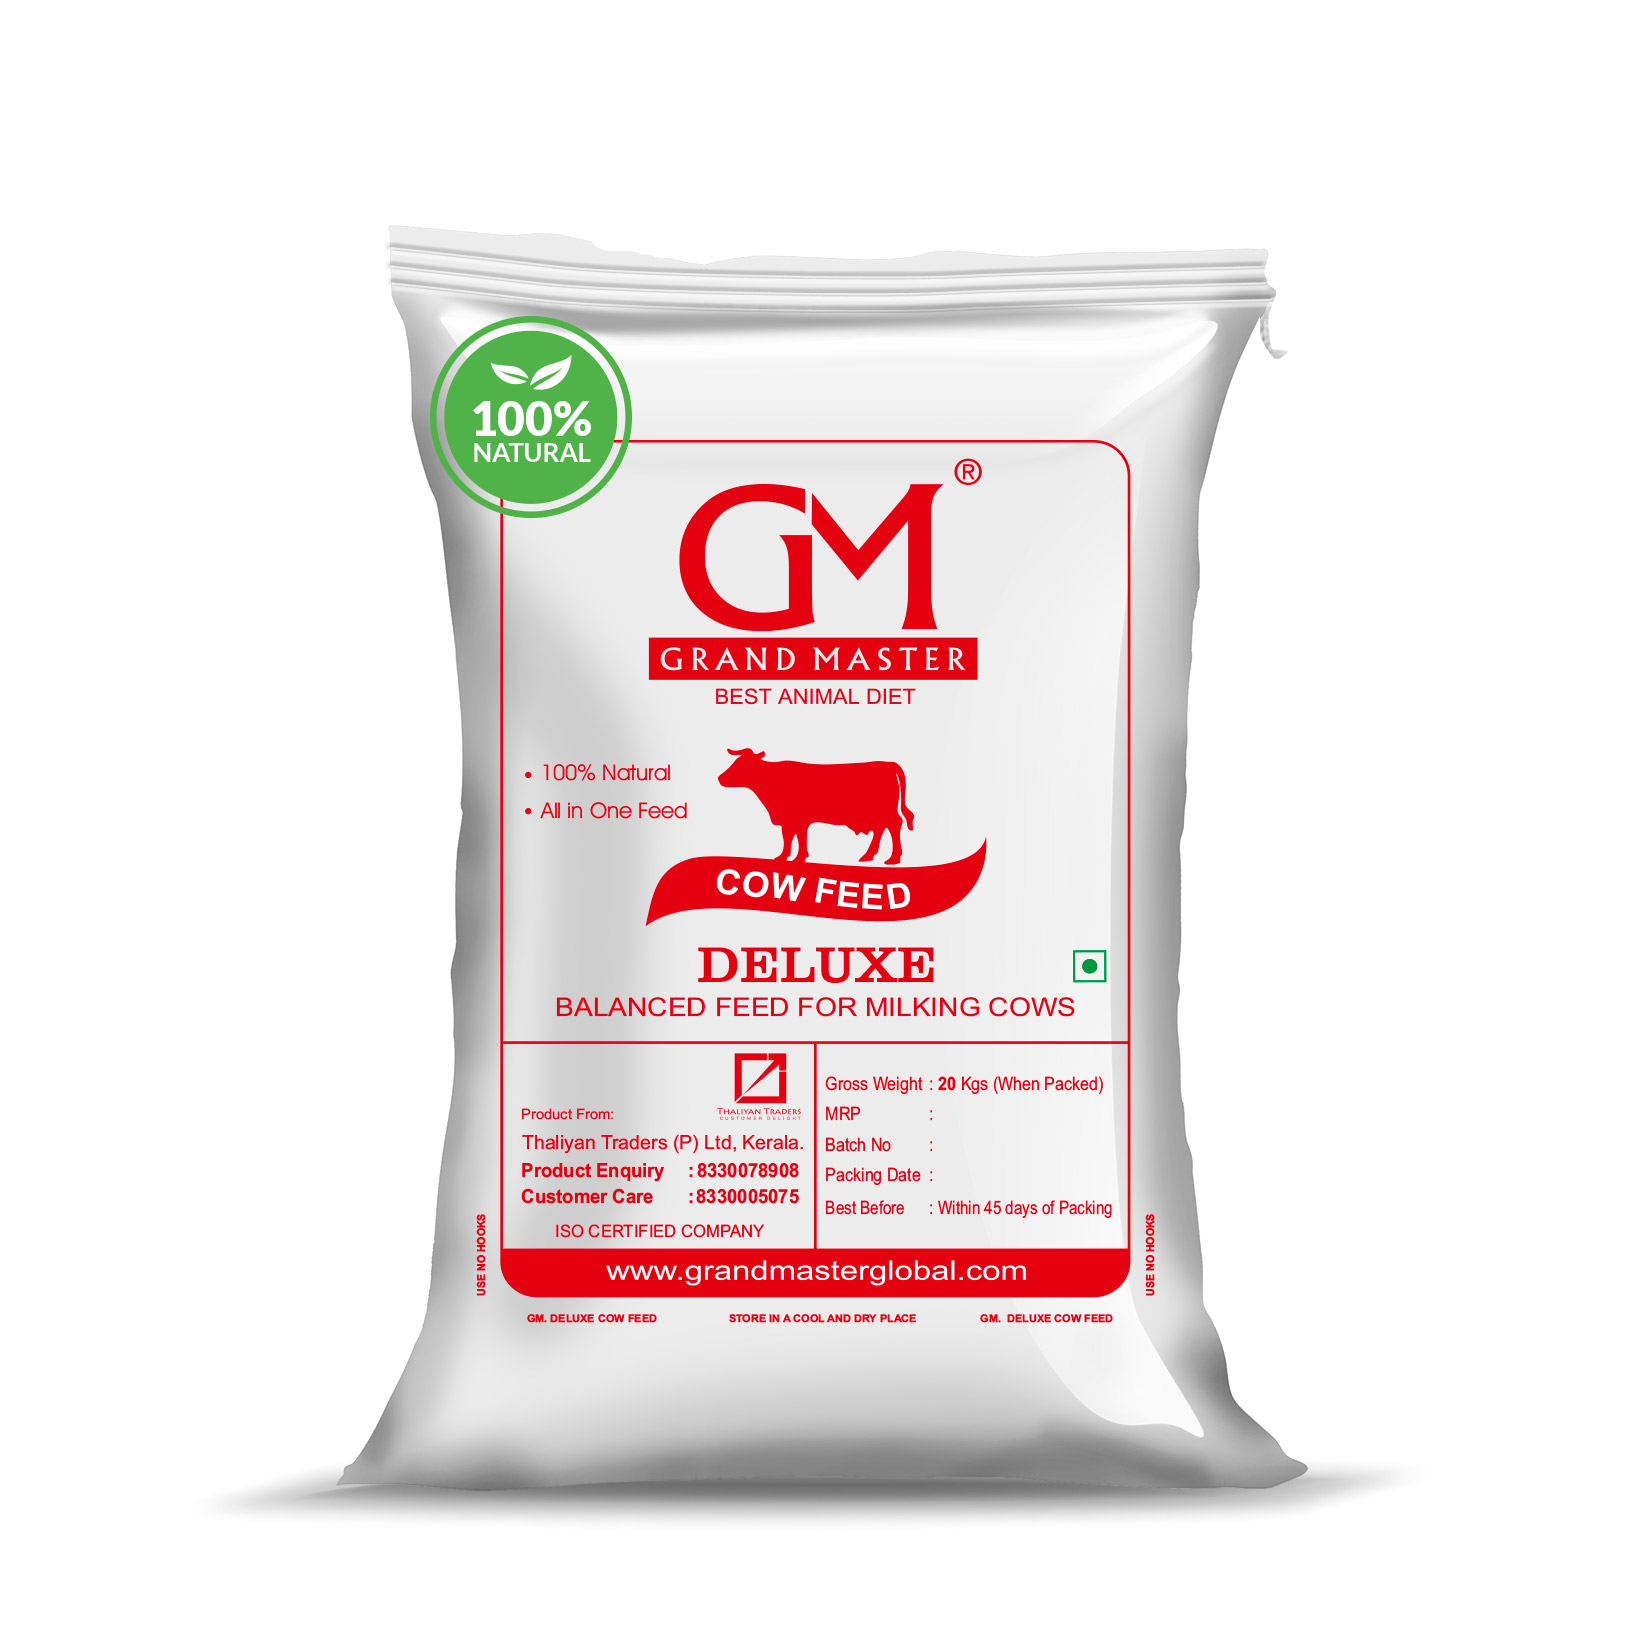 Discover the Ultimate Best Cattle Feed Formula